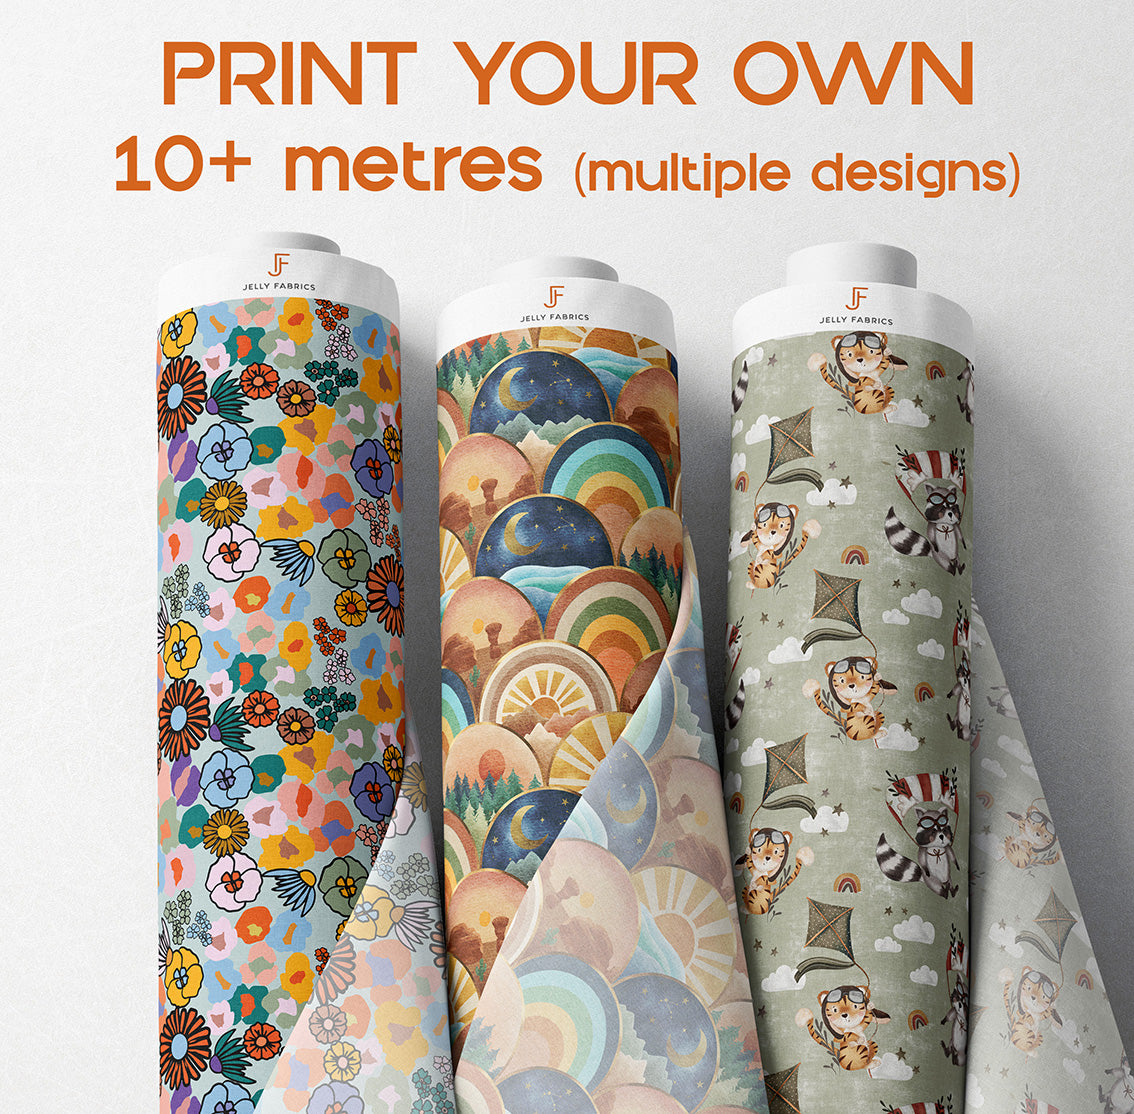 Print Your Own Fabric - Eco Friendly Digital Fabric Printing UK